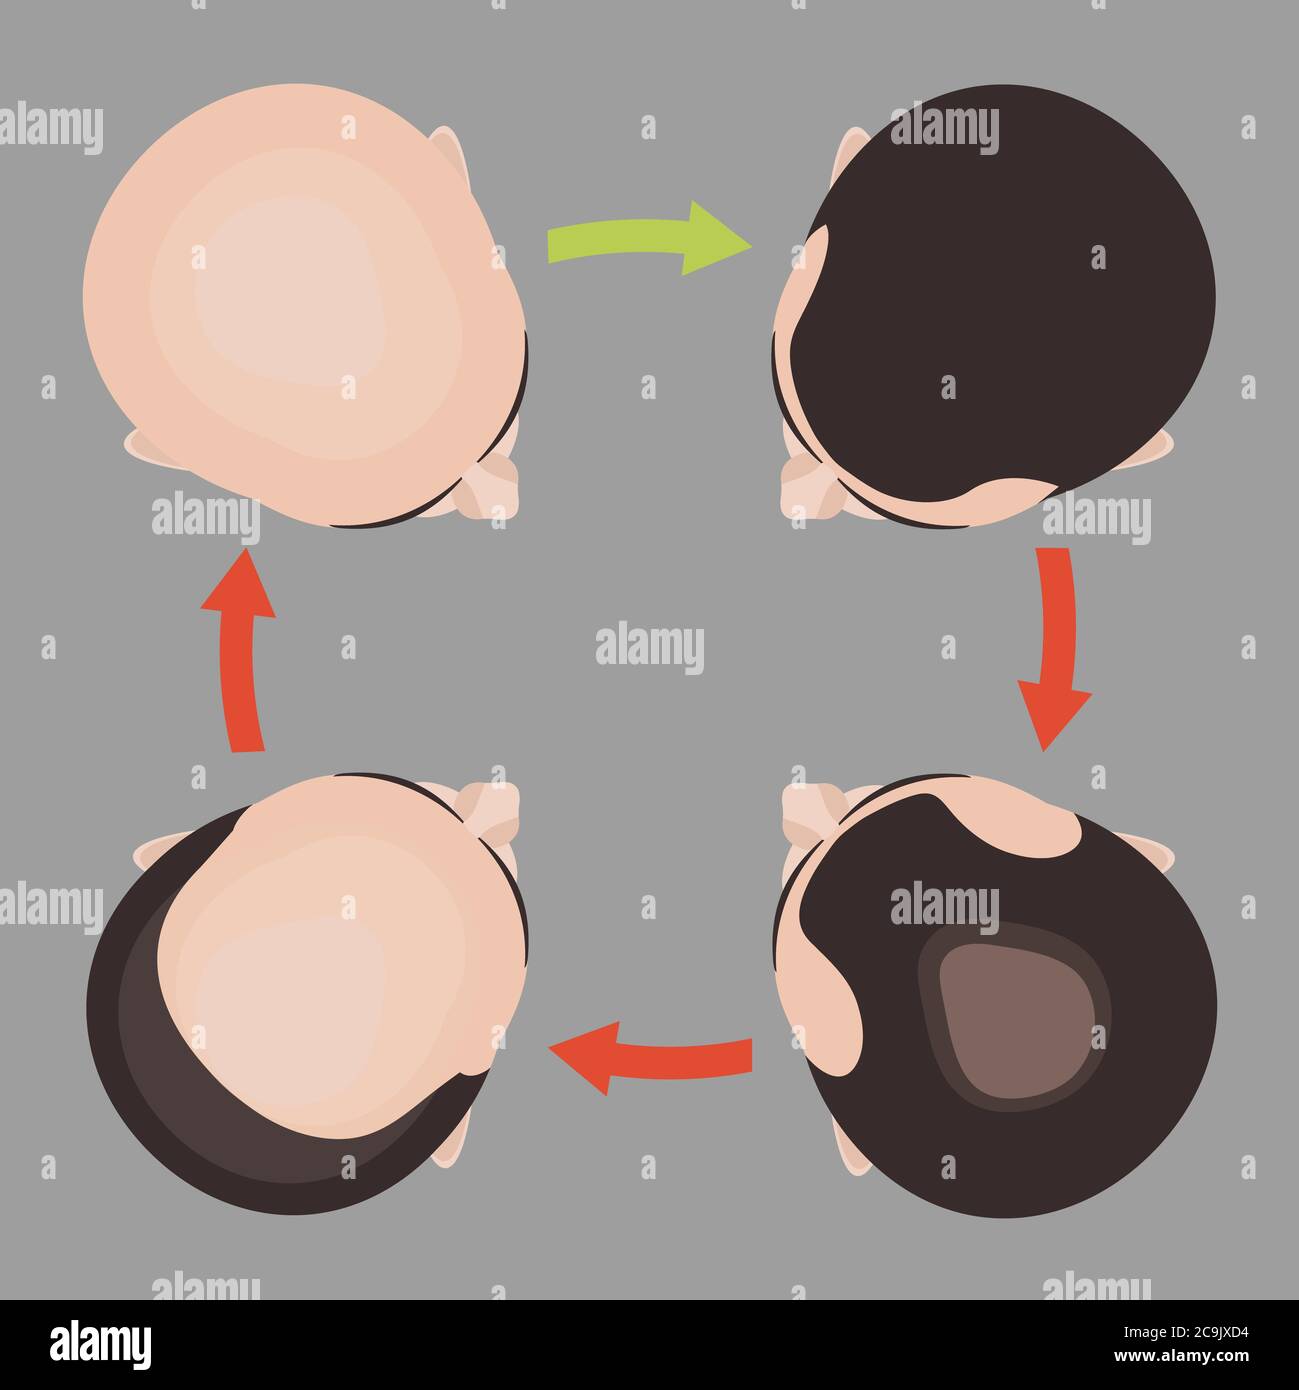 Hair loss stages in men, illustration. Stock Photo